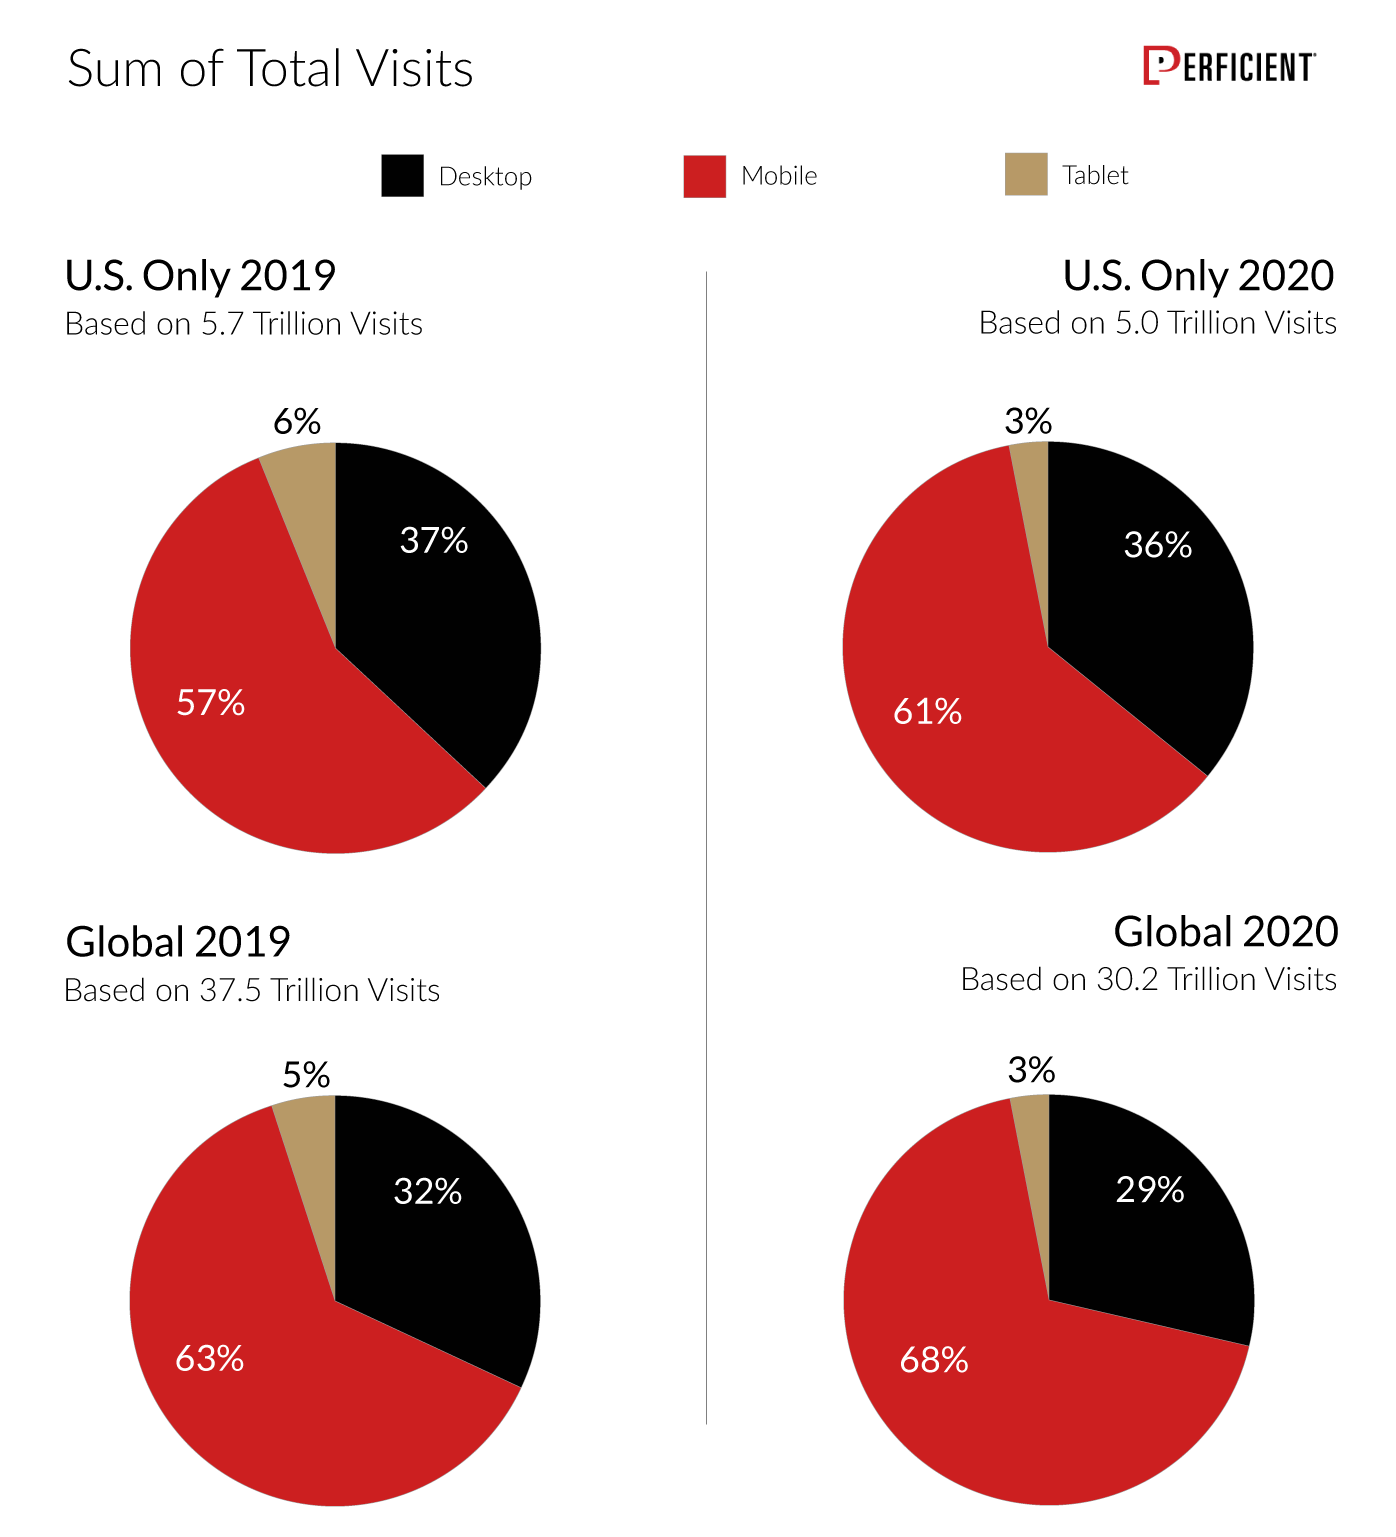 Sum Of Total Desktop, Mobile and Desktop Visits for the U.S. and Global for 2019 and 2020